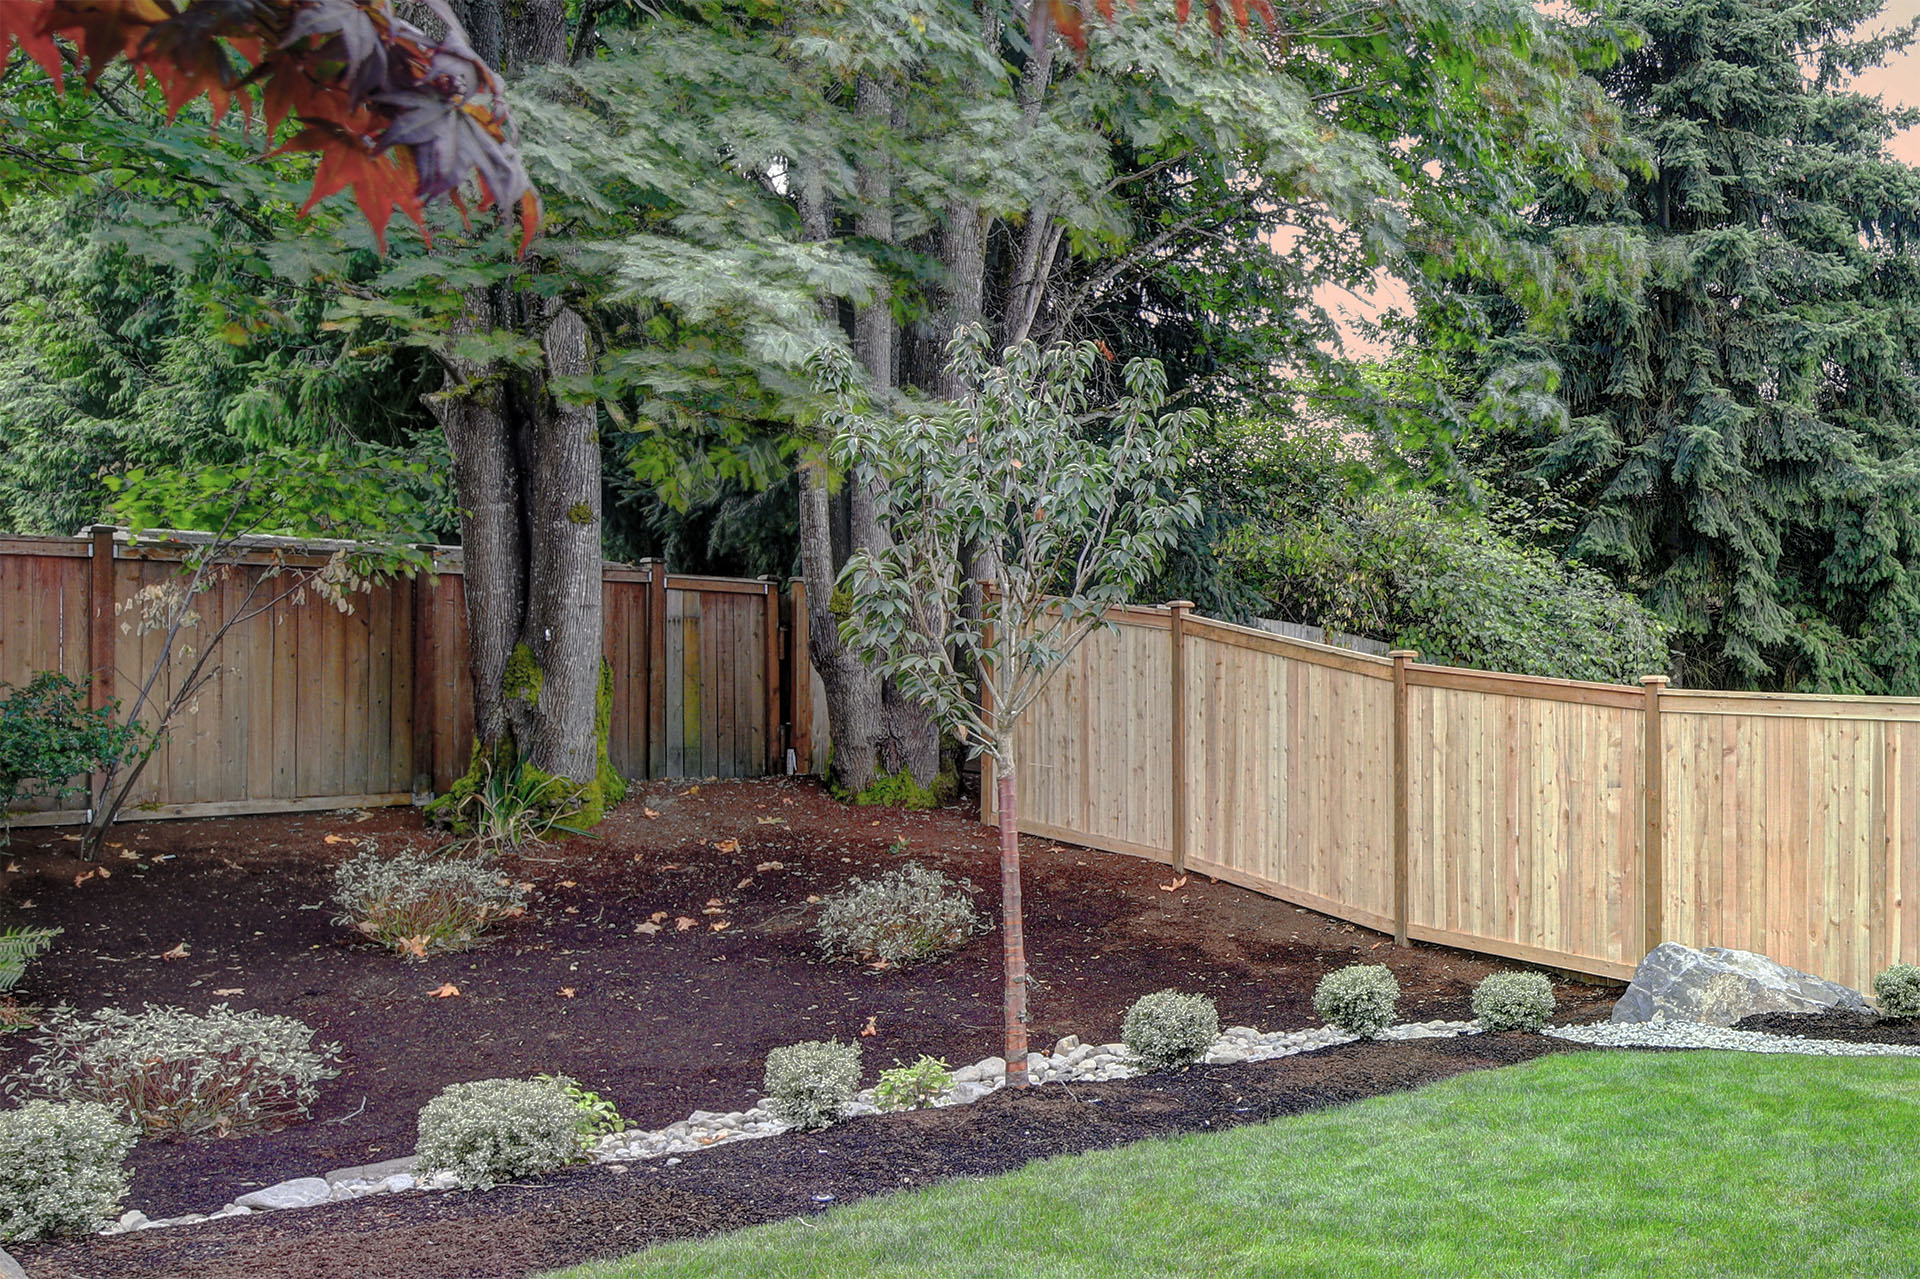 How to Build a Horizontal Plank Fence in a Hillside Backyard